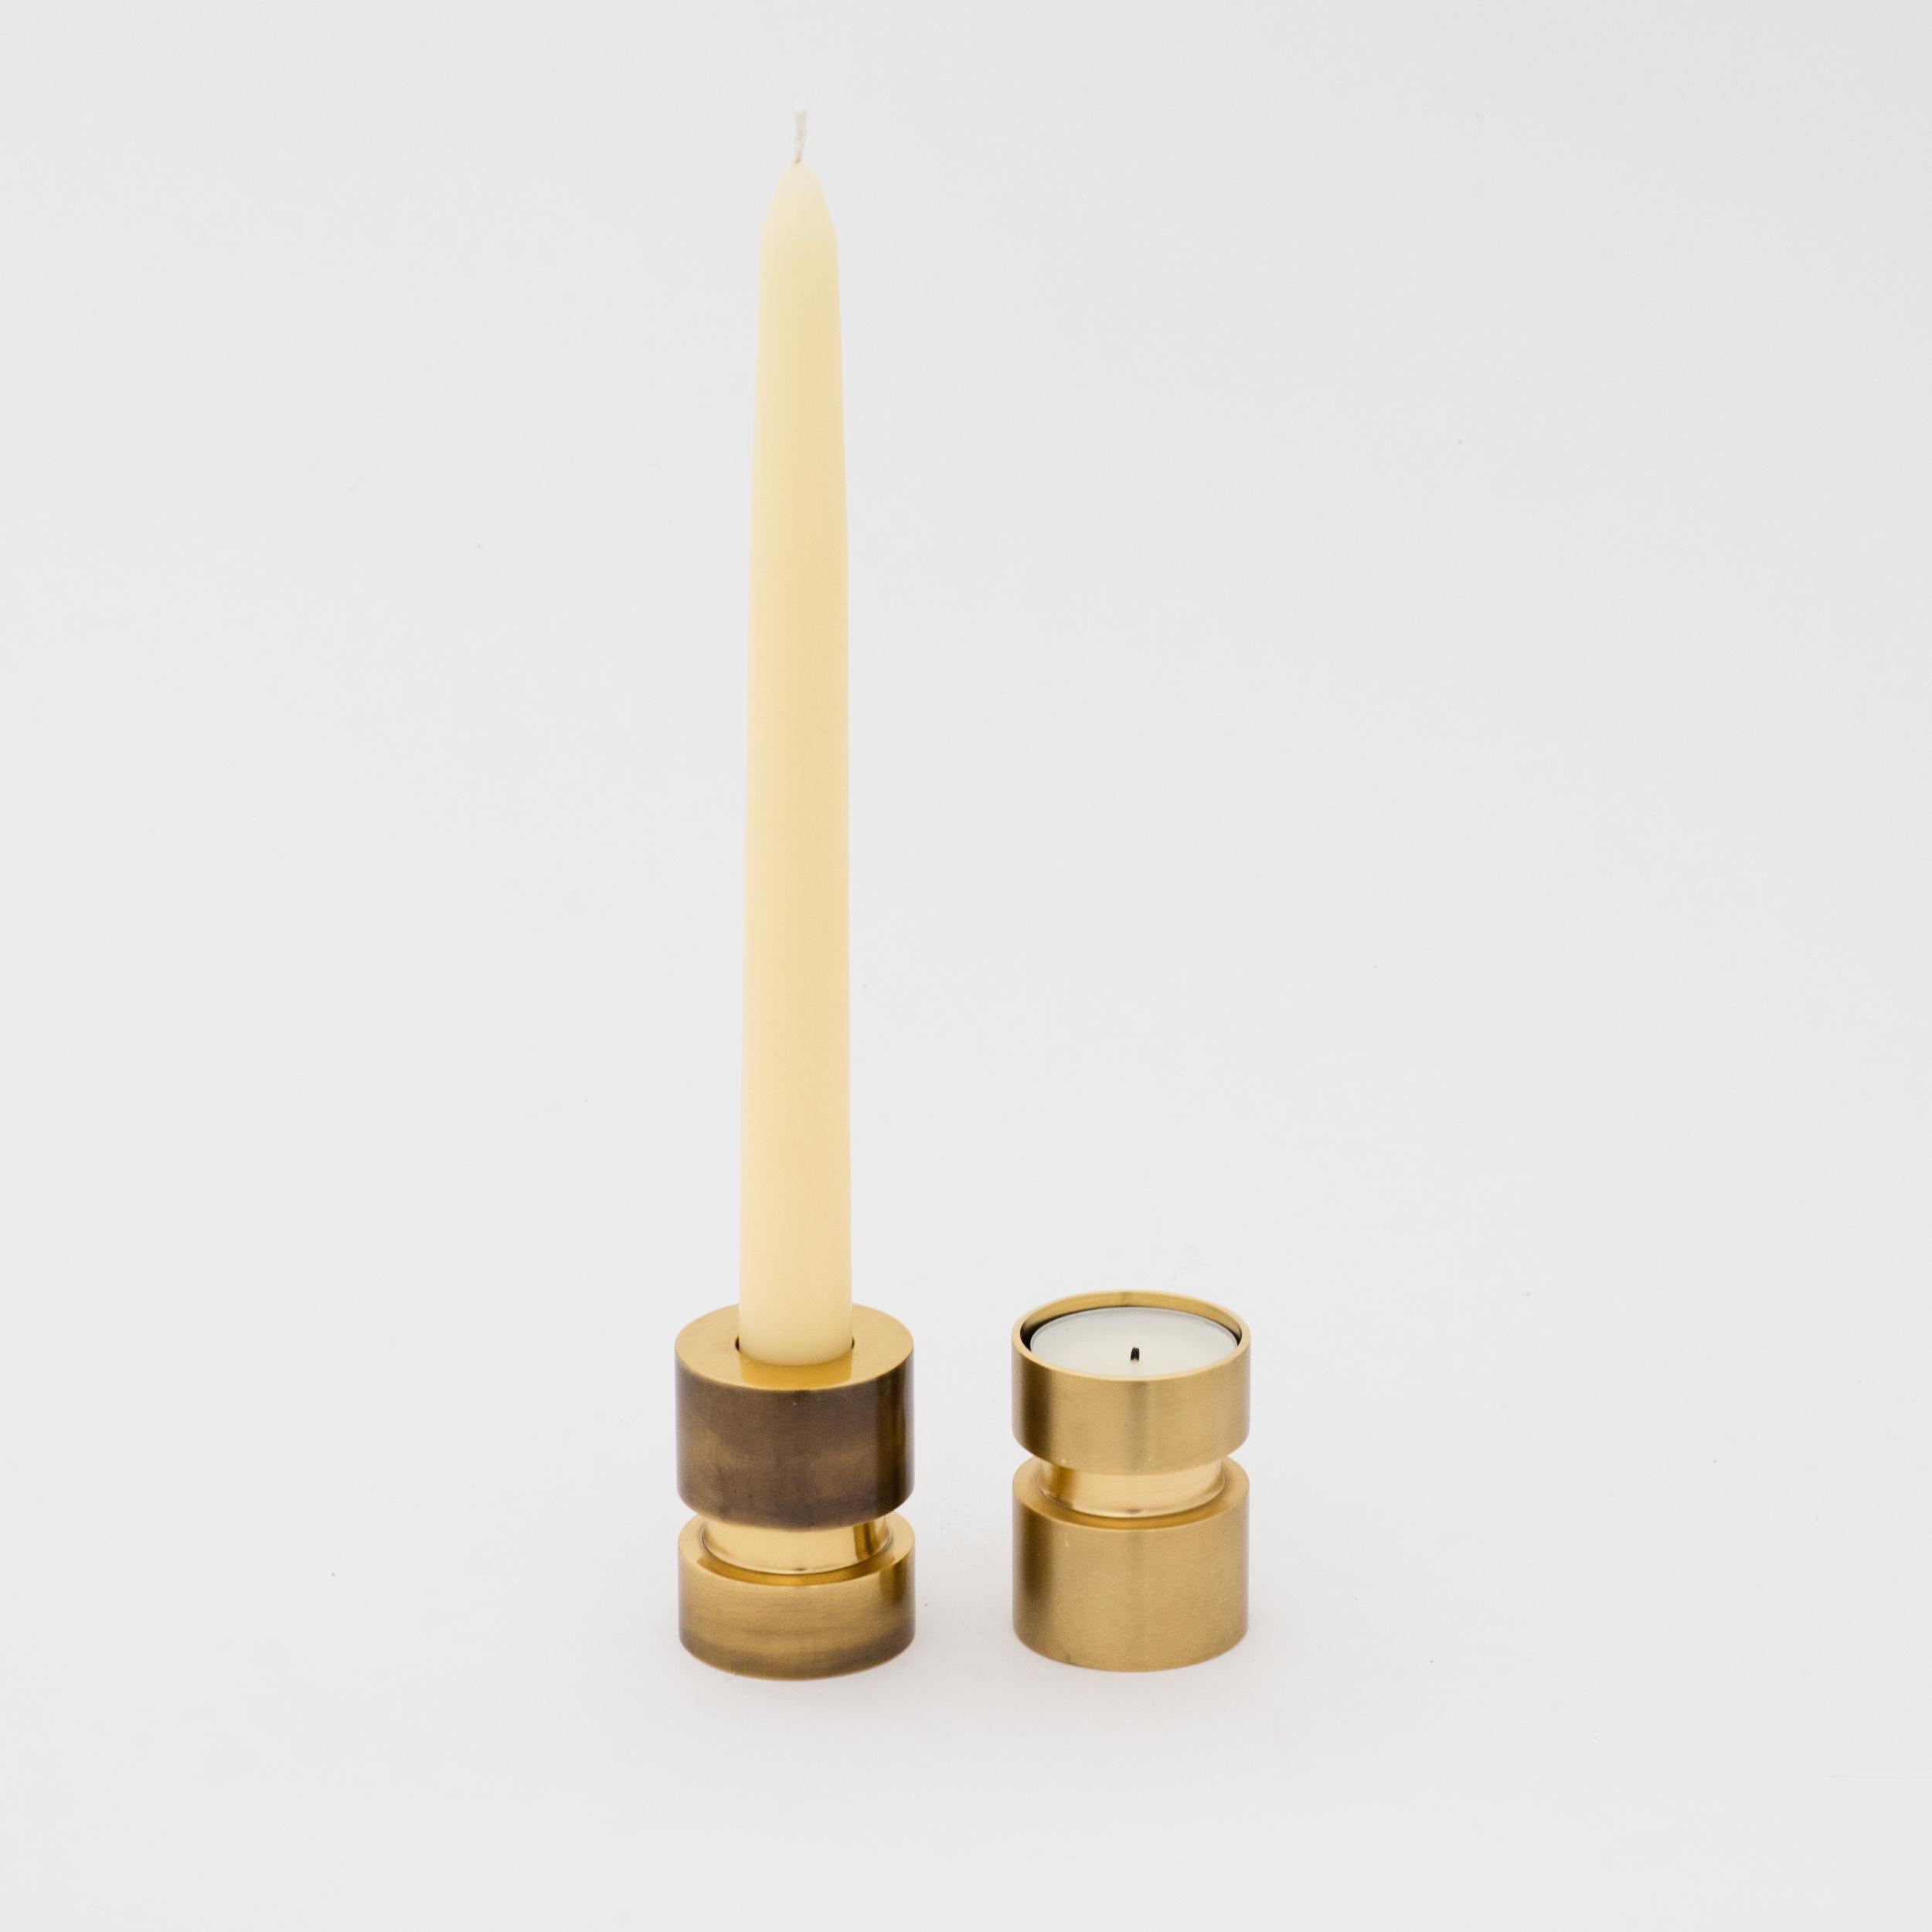 Reversible Handmade Cast Brass Tea-Light + Taper Candleholder with Bronze Patina In New Condition For Sale In London, GB